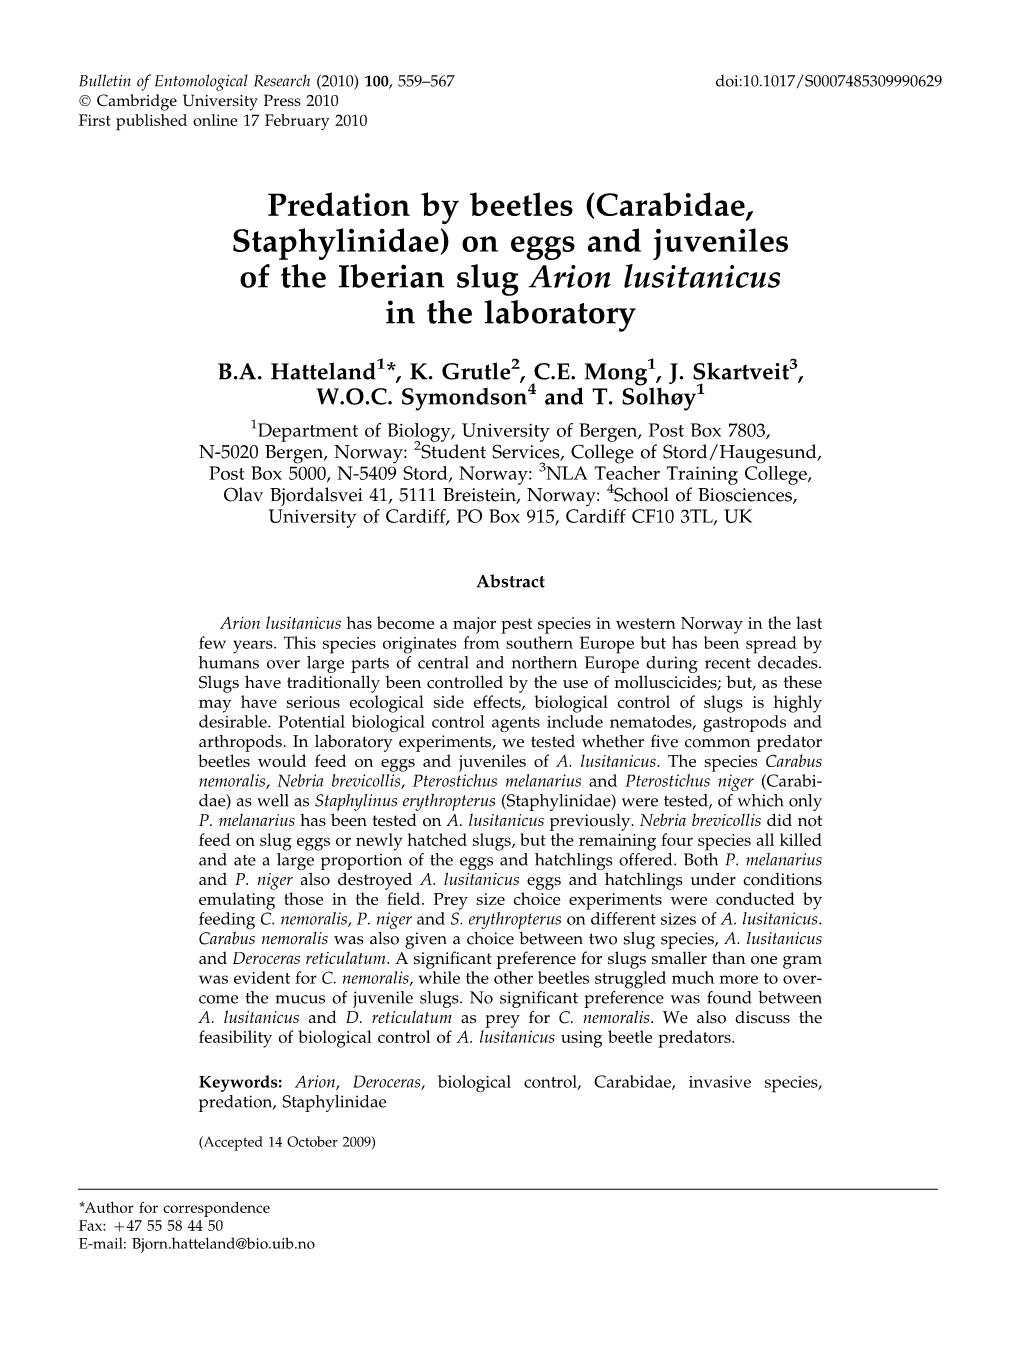 Predation by Beetles (Carabidae, Staphylinidae) on Eggs and Juveniles of the Iberian Slug Arion Lusitanicus in the Laboratory